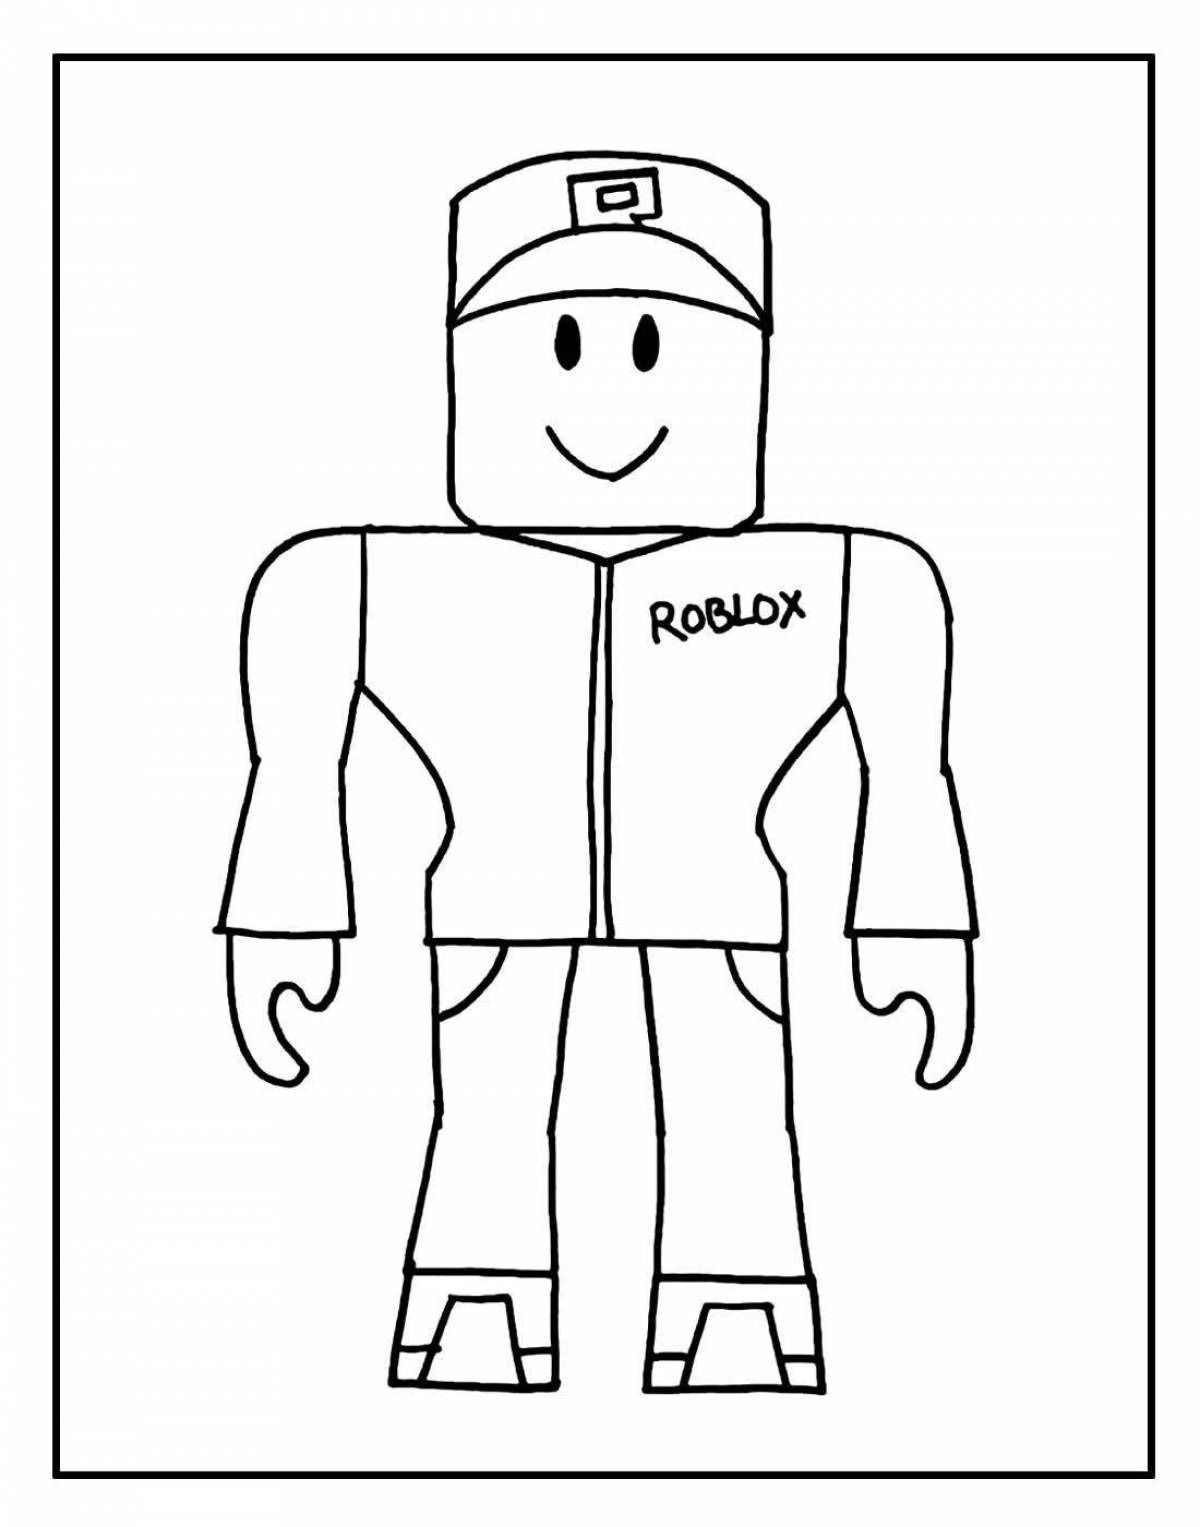 Roblox marvelous heroes coloring page